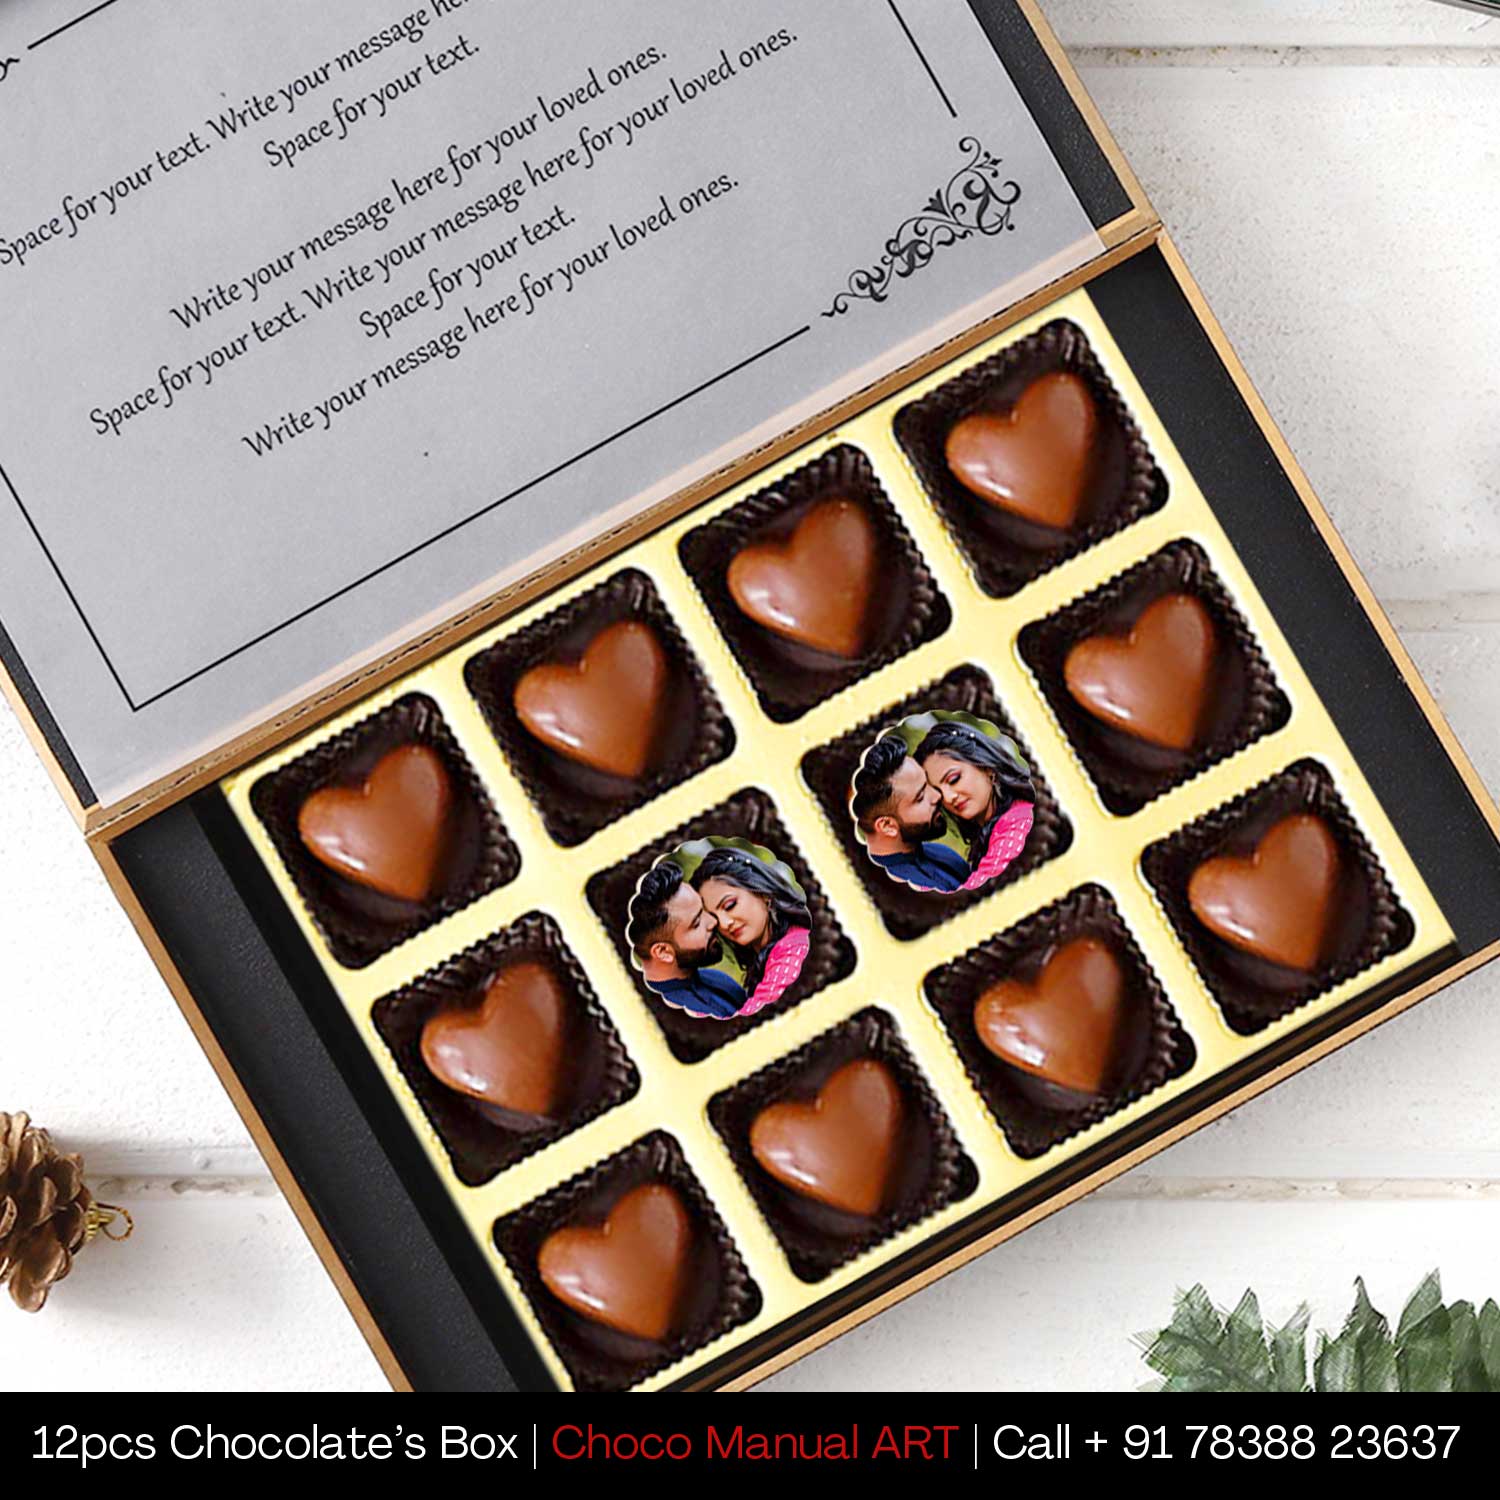 Personalized Propose Day chocolate gift with photo/name printed